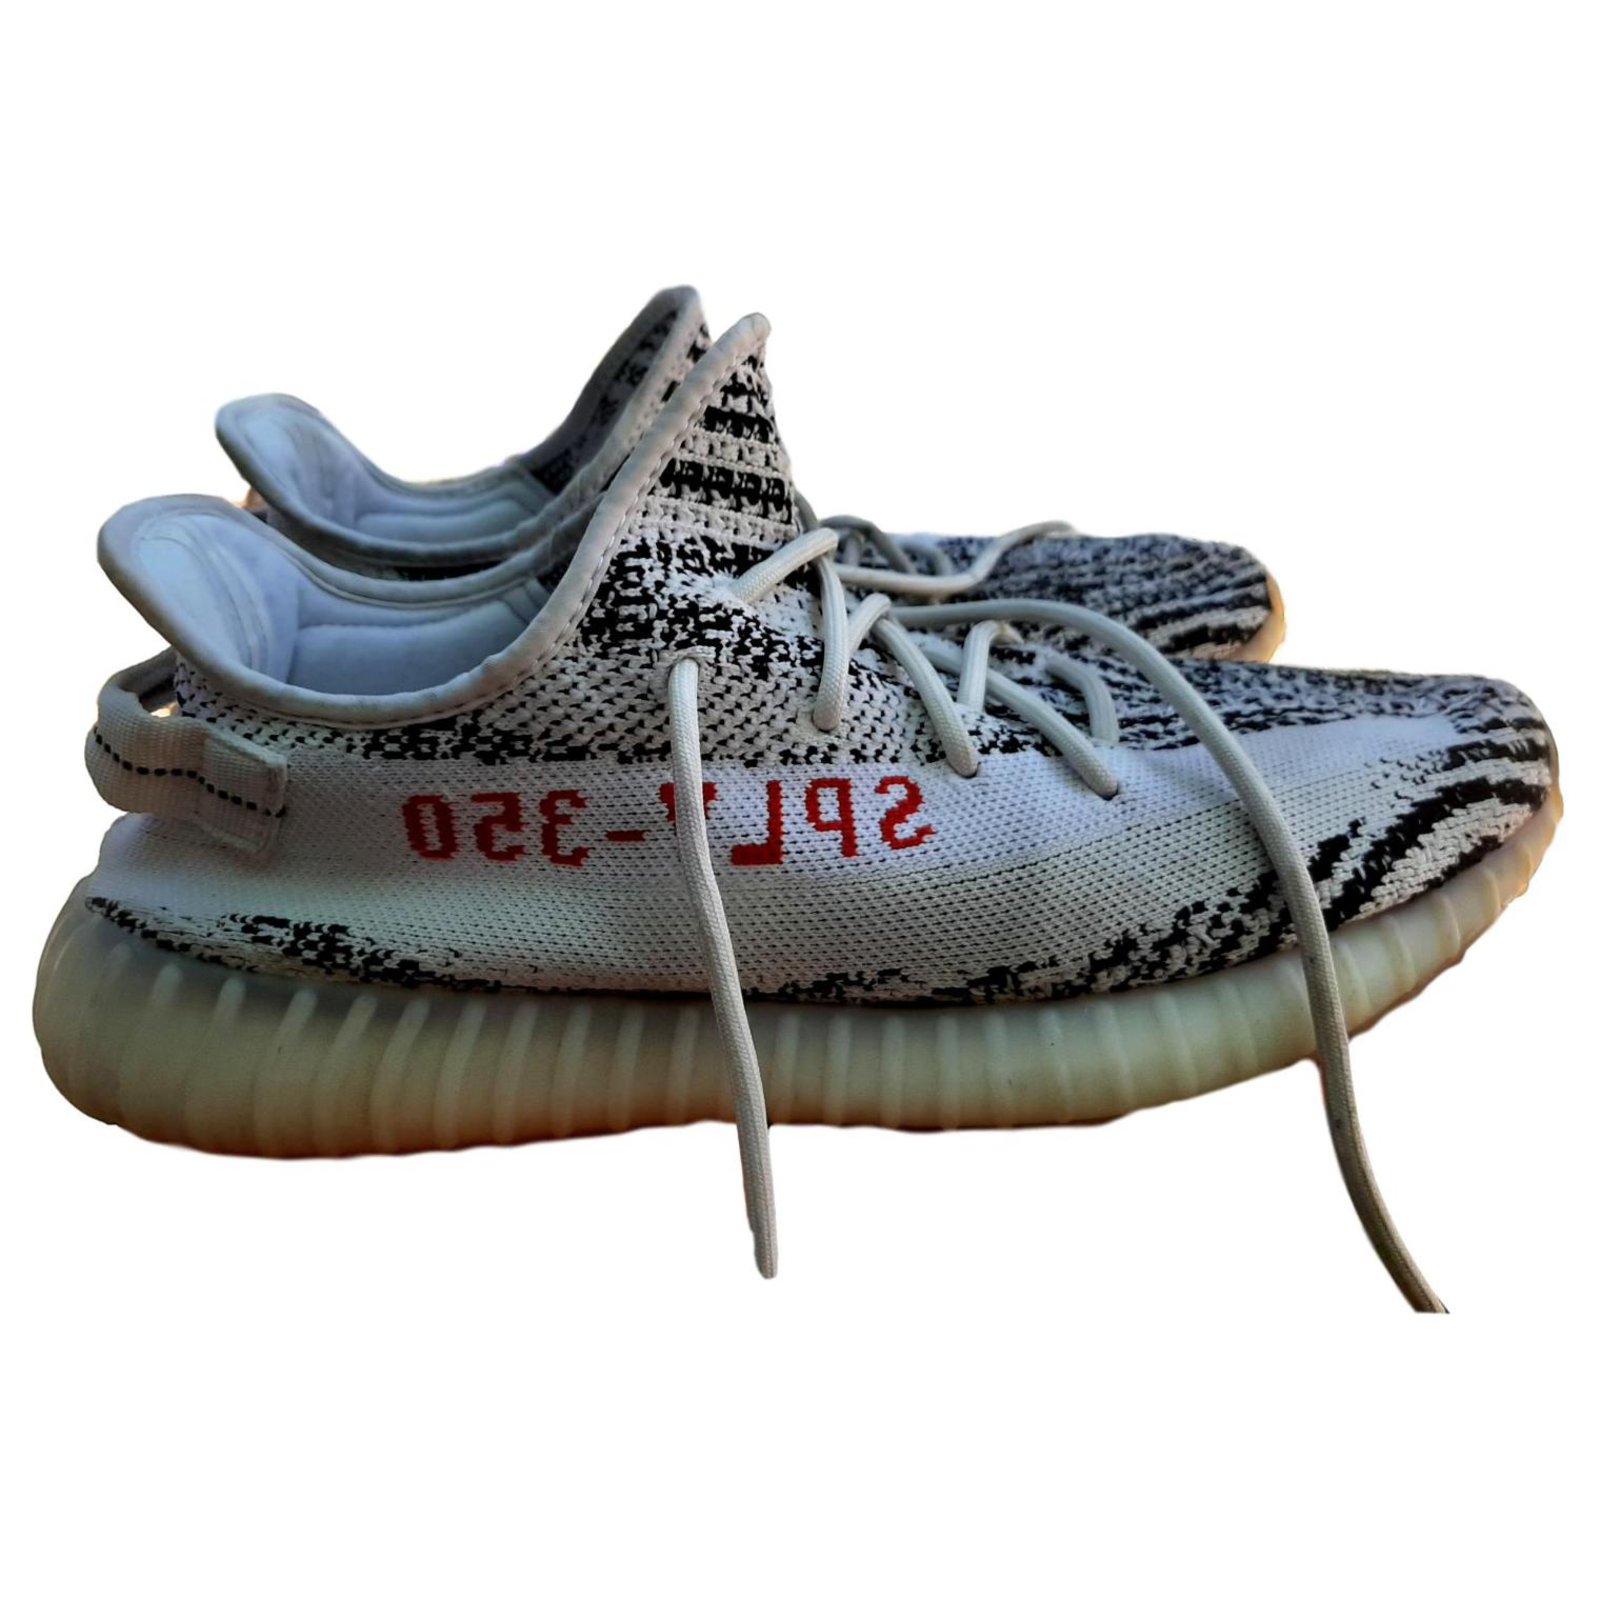 yeezy boots v2